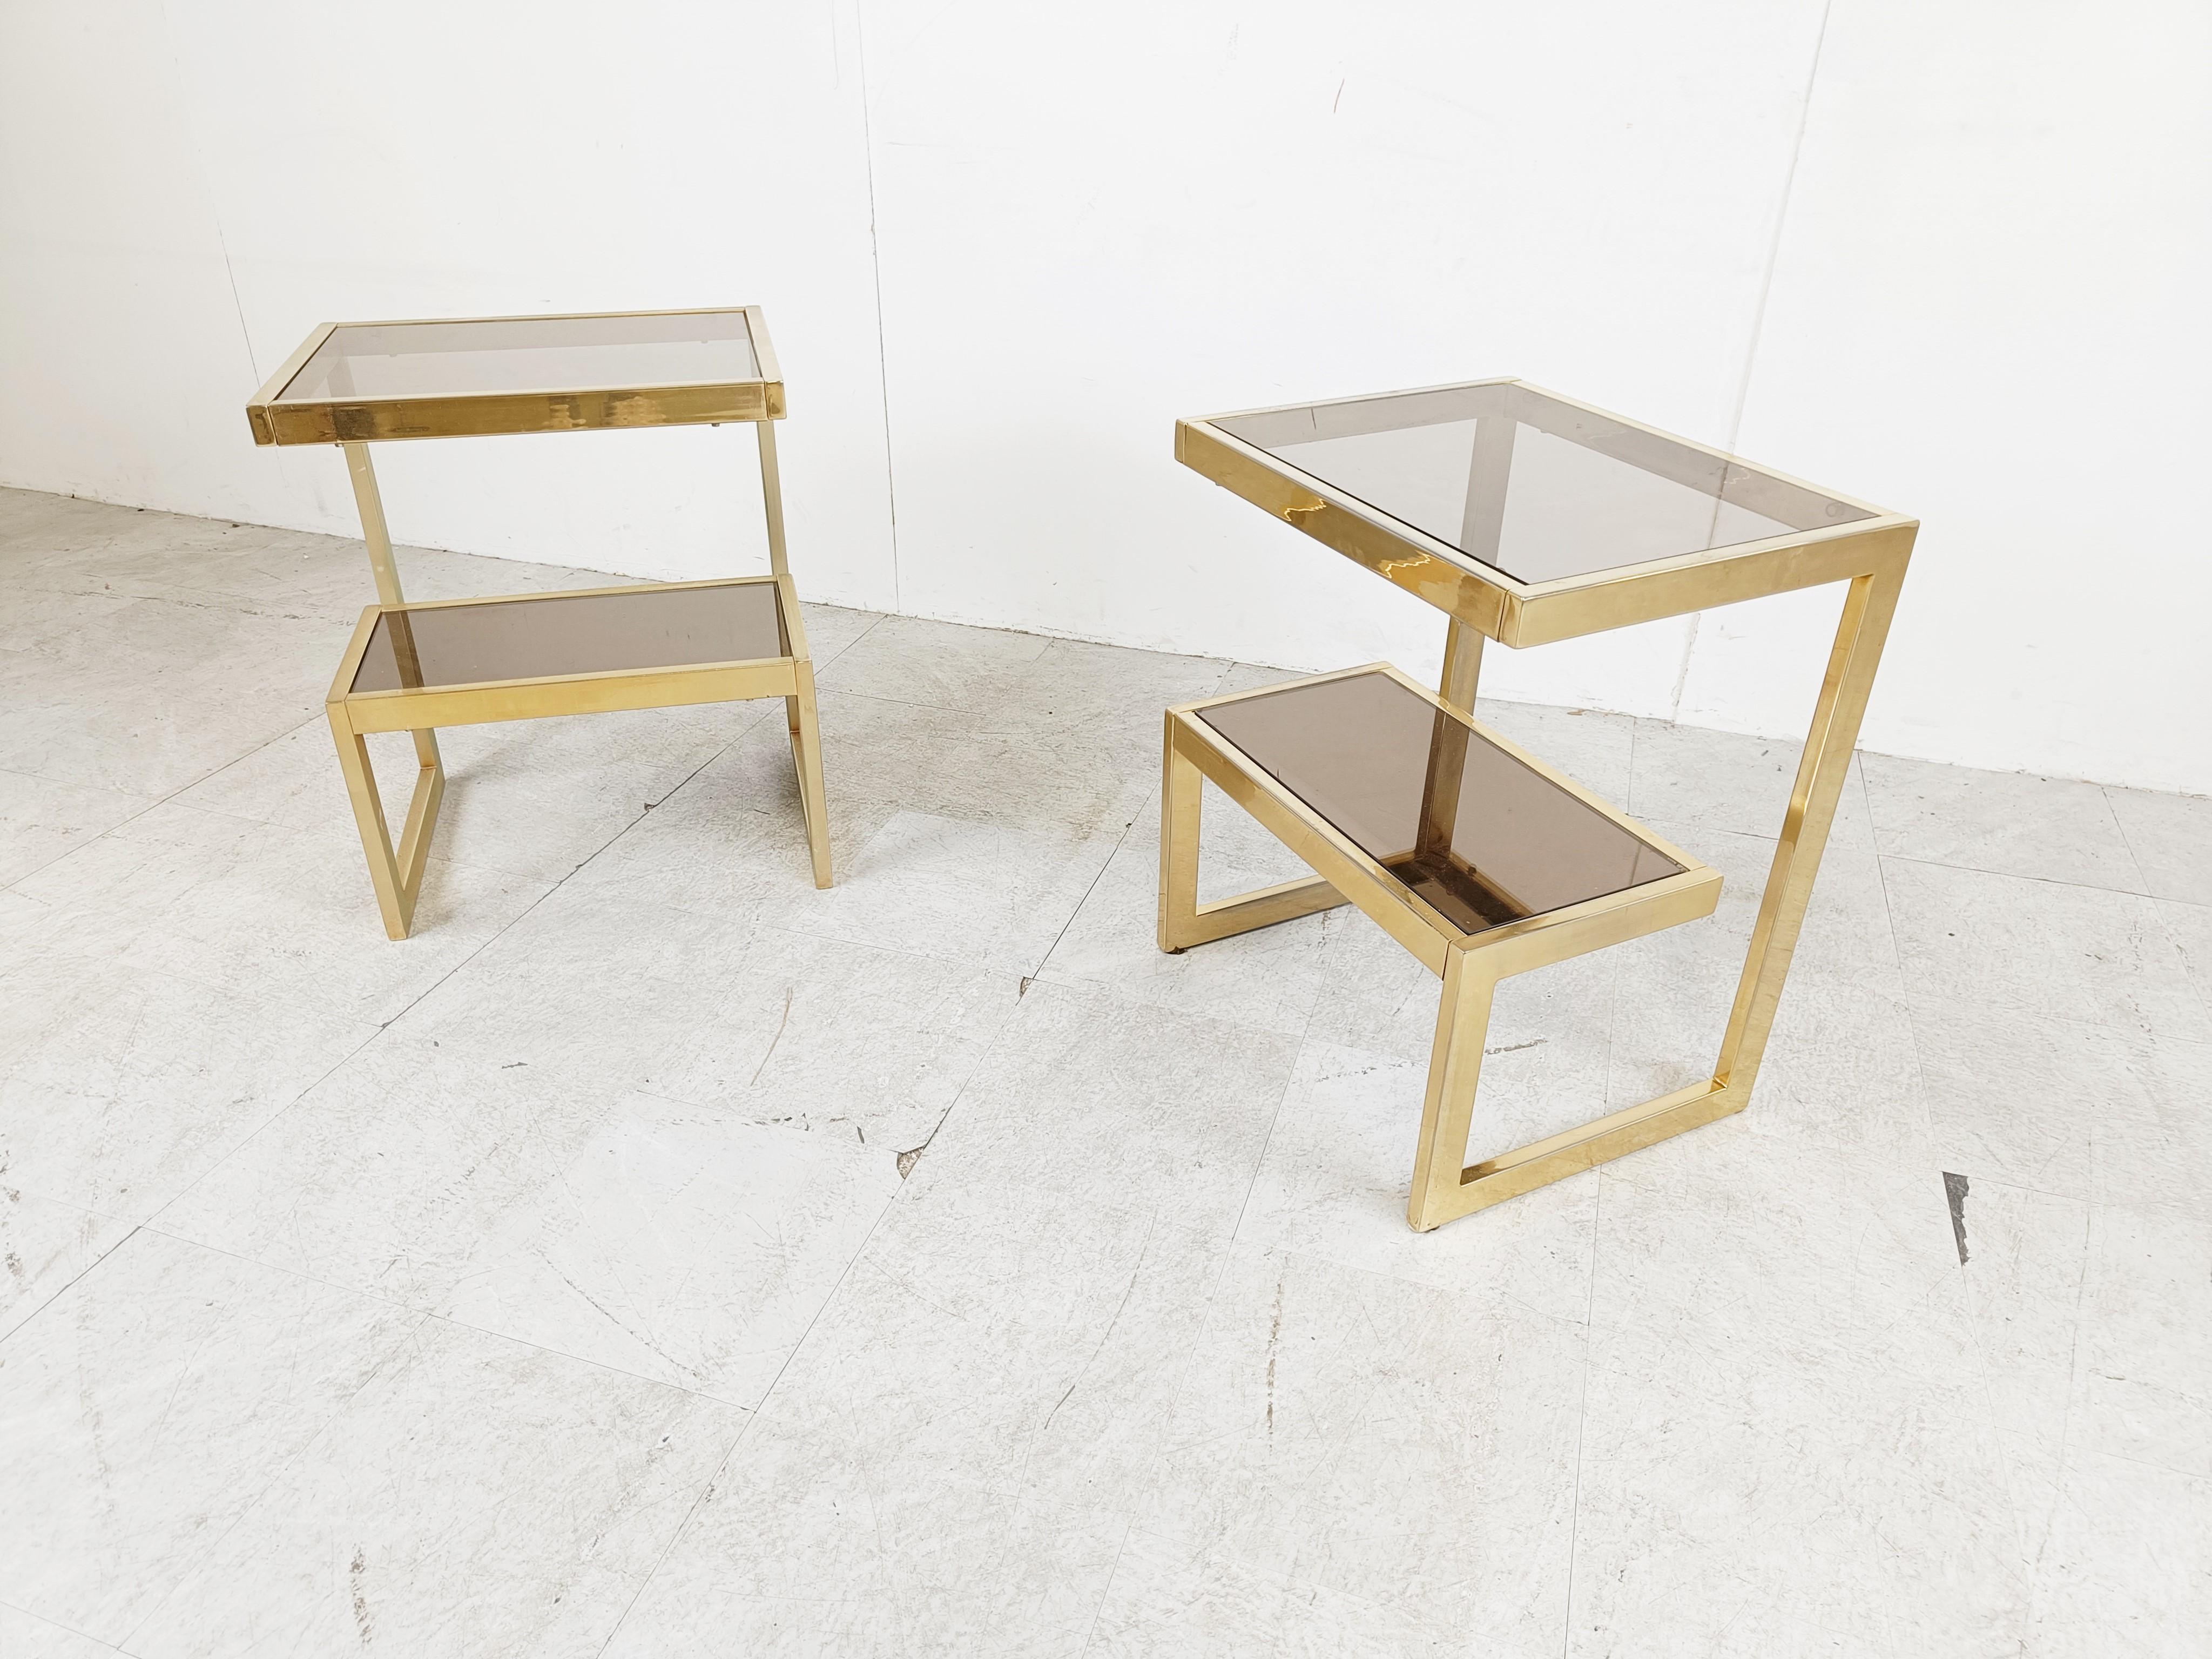 Pair of 23k gold layered 'G'-shaped side table produced by Belgochrom.

The tables have smoked glass tops.

Good condition, original glass.

1970s - Belgium

Height: 60cm/23.5